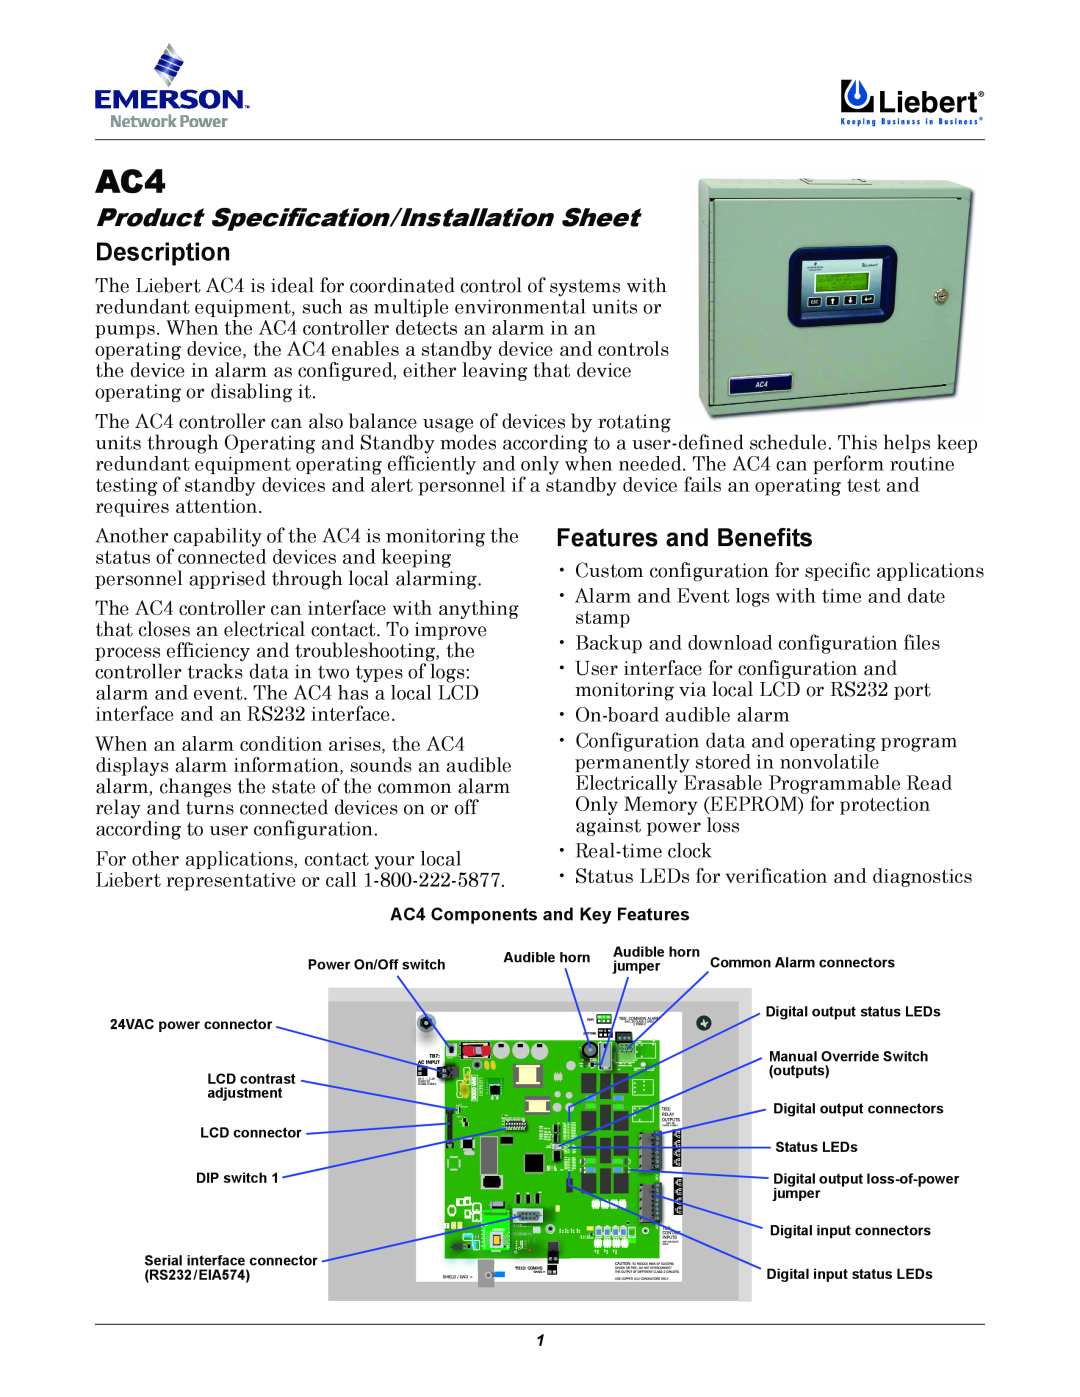 Liebert AC4 manual Description, Features and Benefits, Product Specification/Installation Sheet 